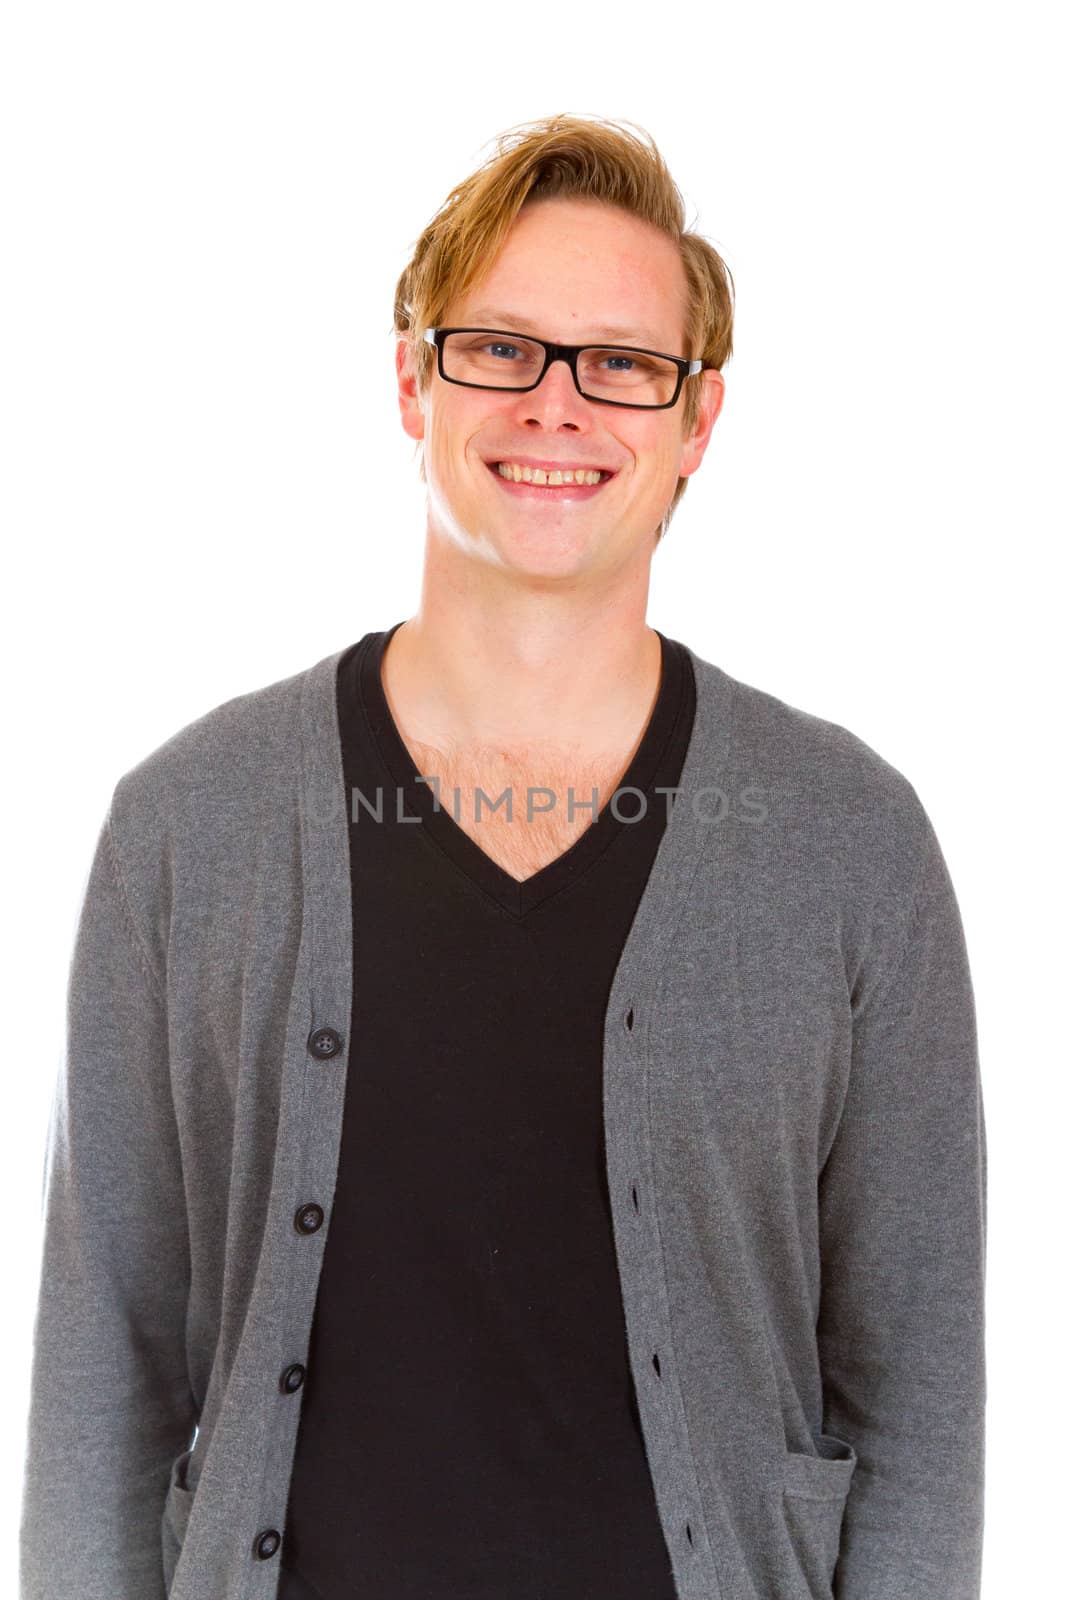 An attractive handsome man poses in the studio for a portrait against an isolated white background while wearing a black shirt and a grey cardigan sweater.